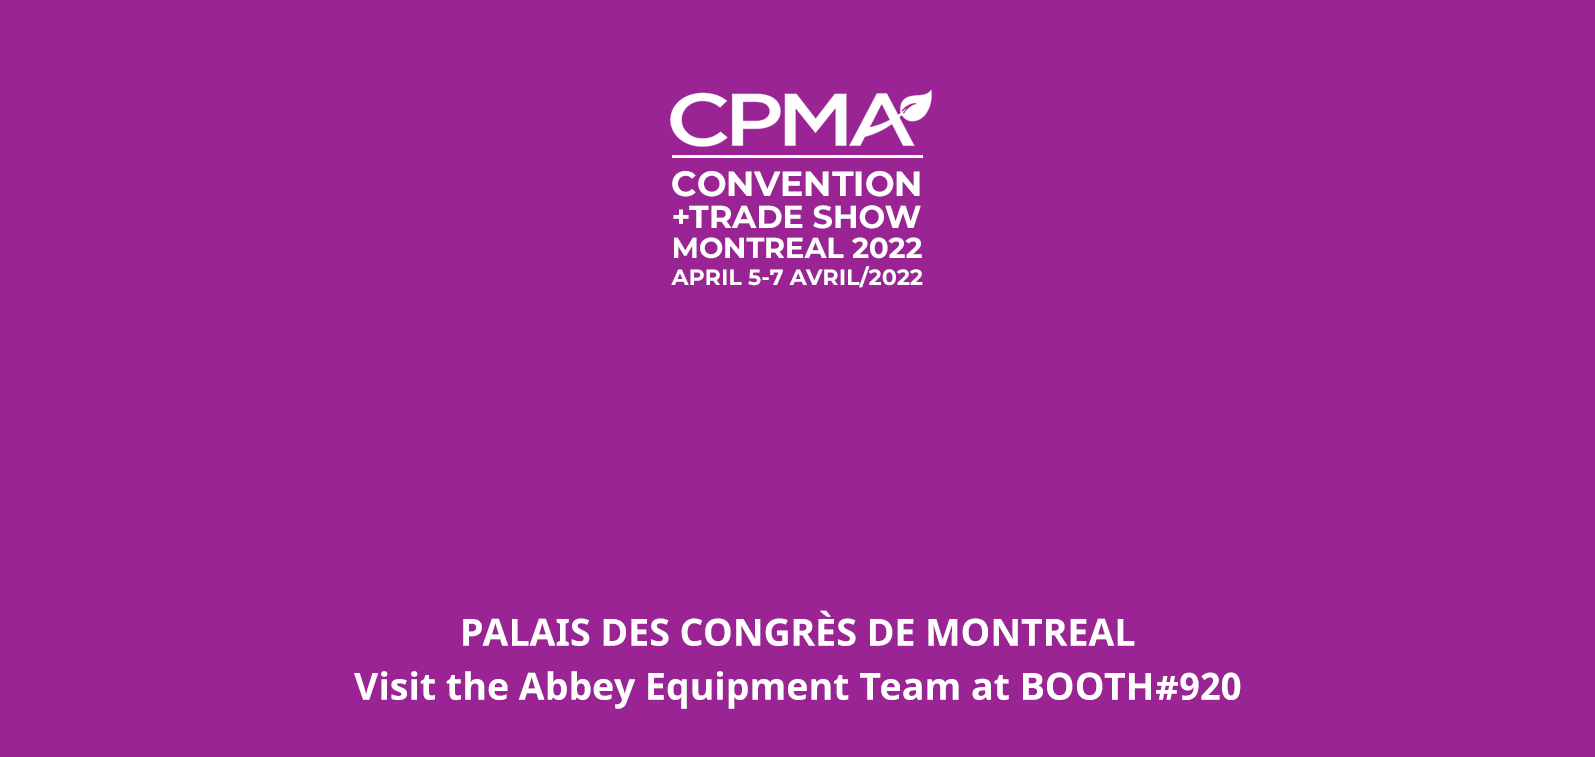 Turatti will be present with its Canadian partner Abbey Equipment Solutions at the “CPMA Convention + Trade Show”